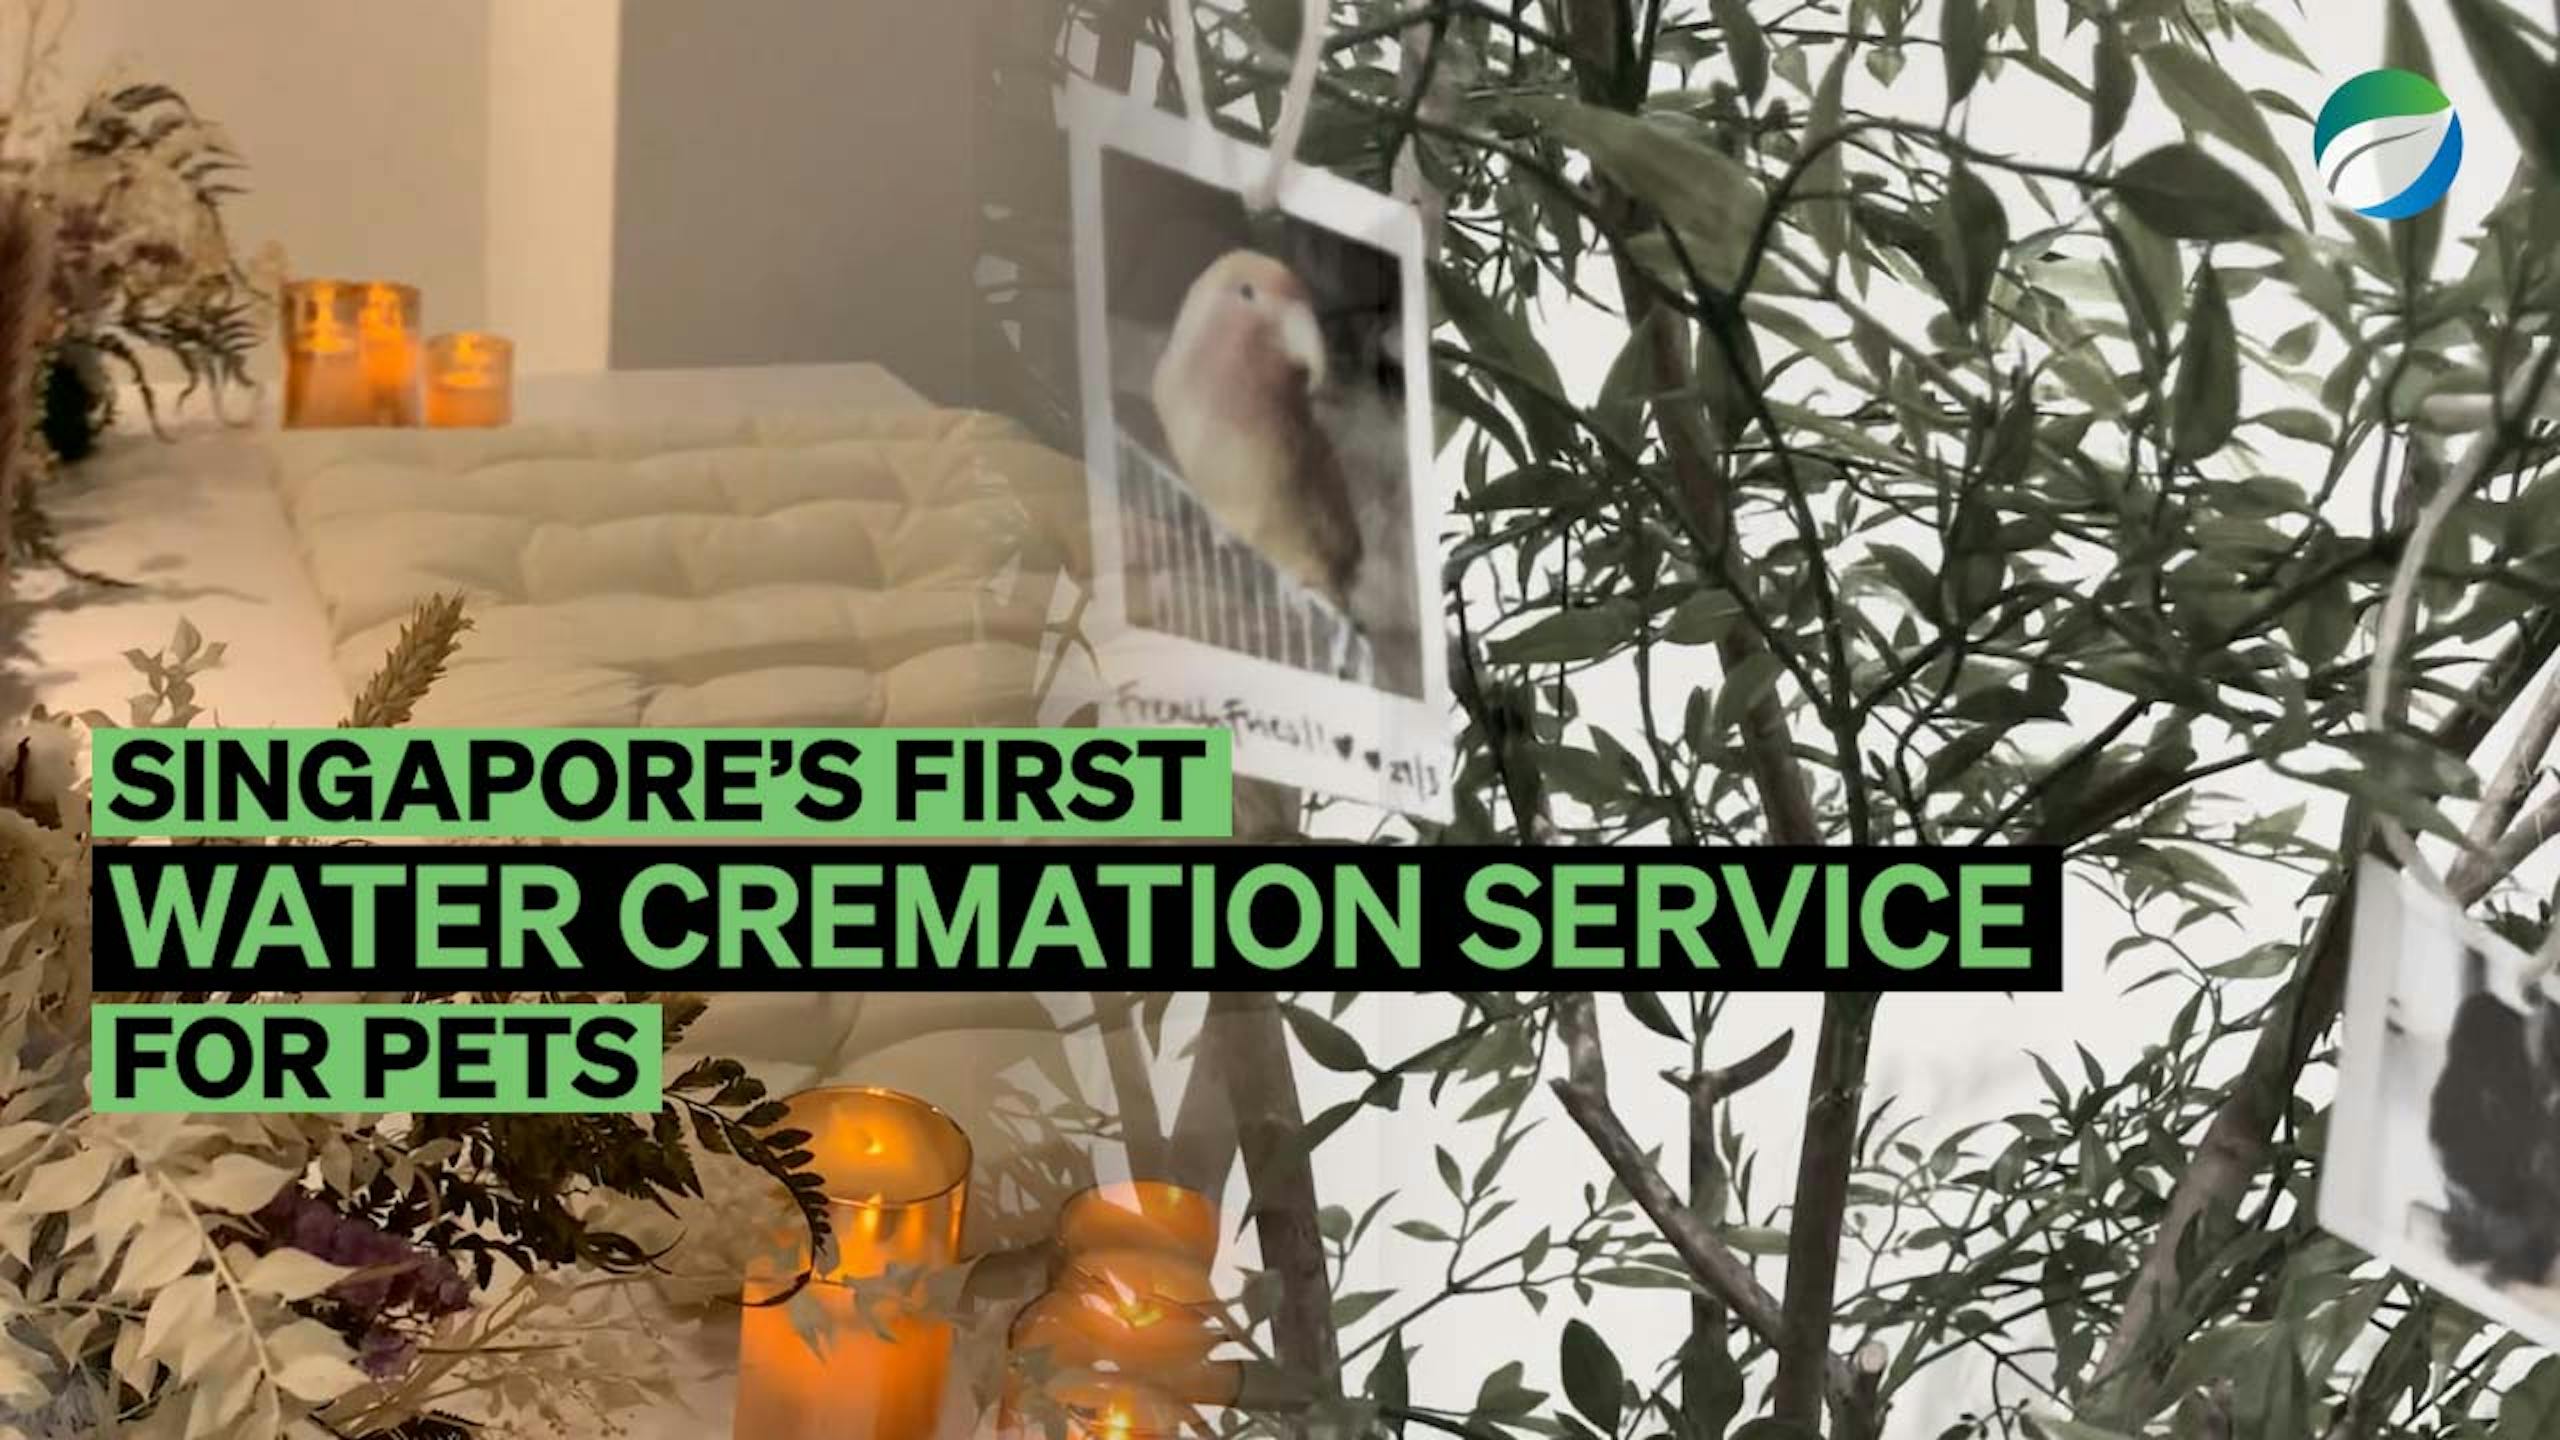 The Green Mortician is Singapore's first water cremation service